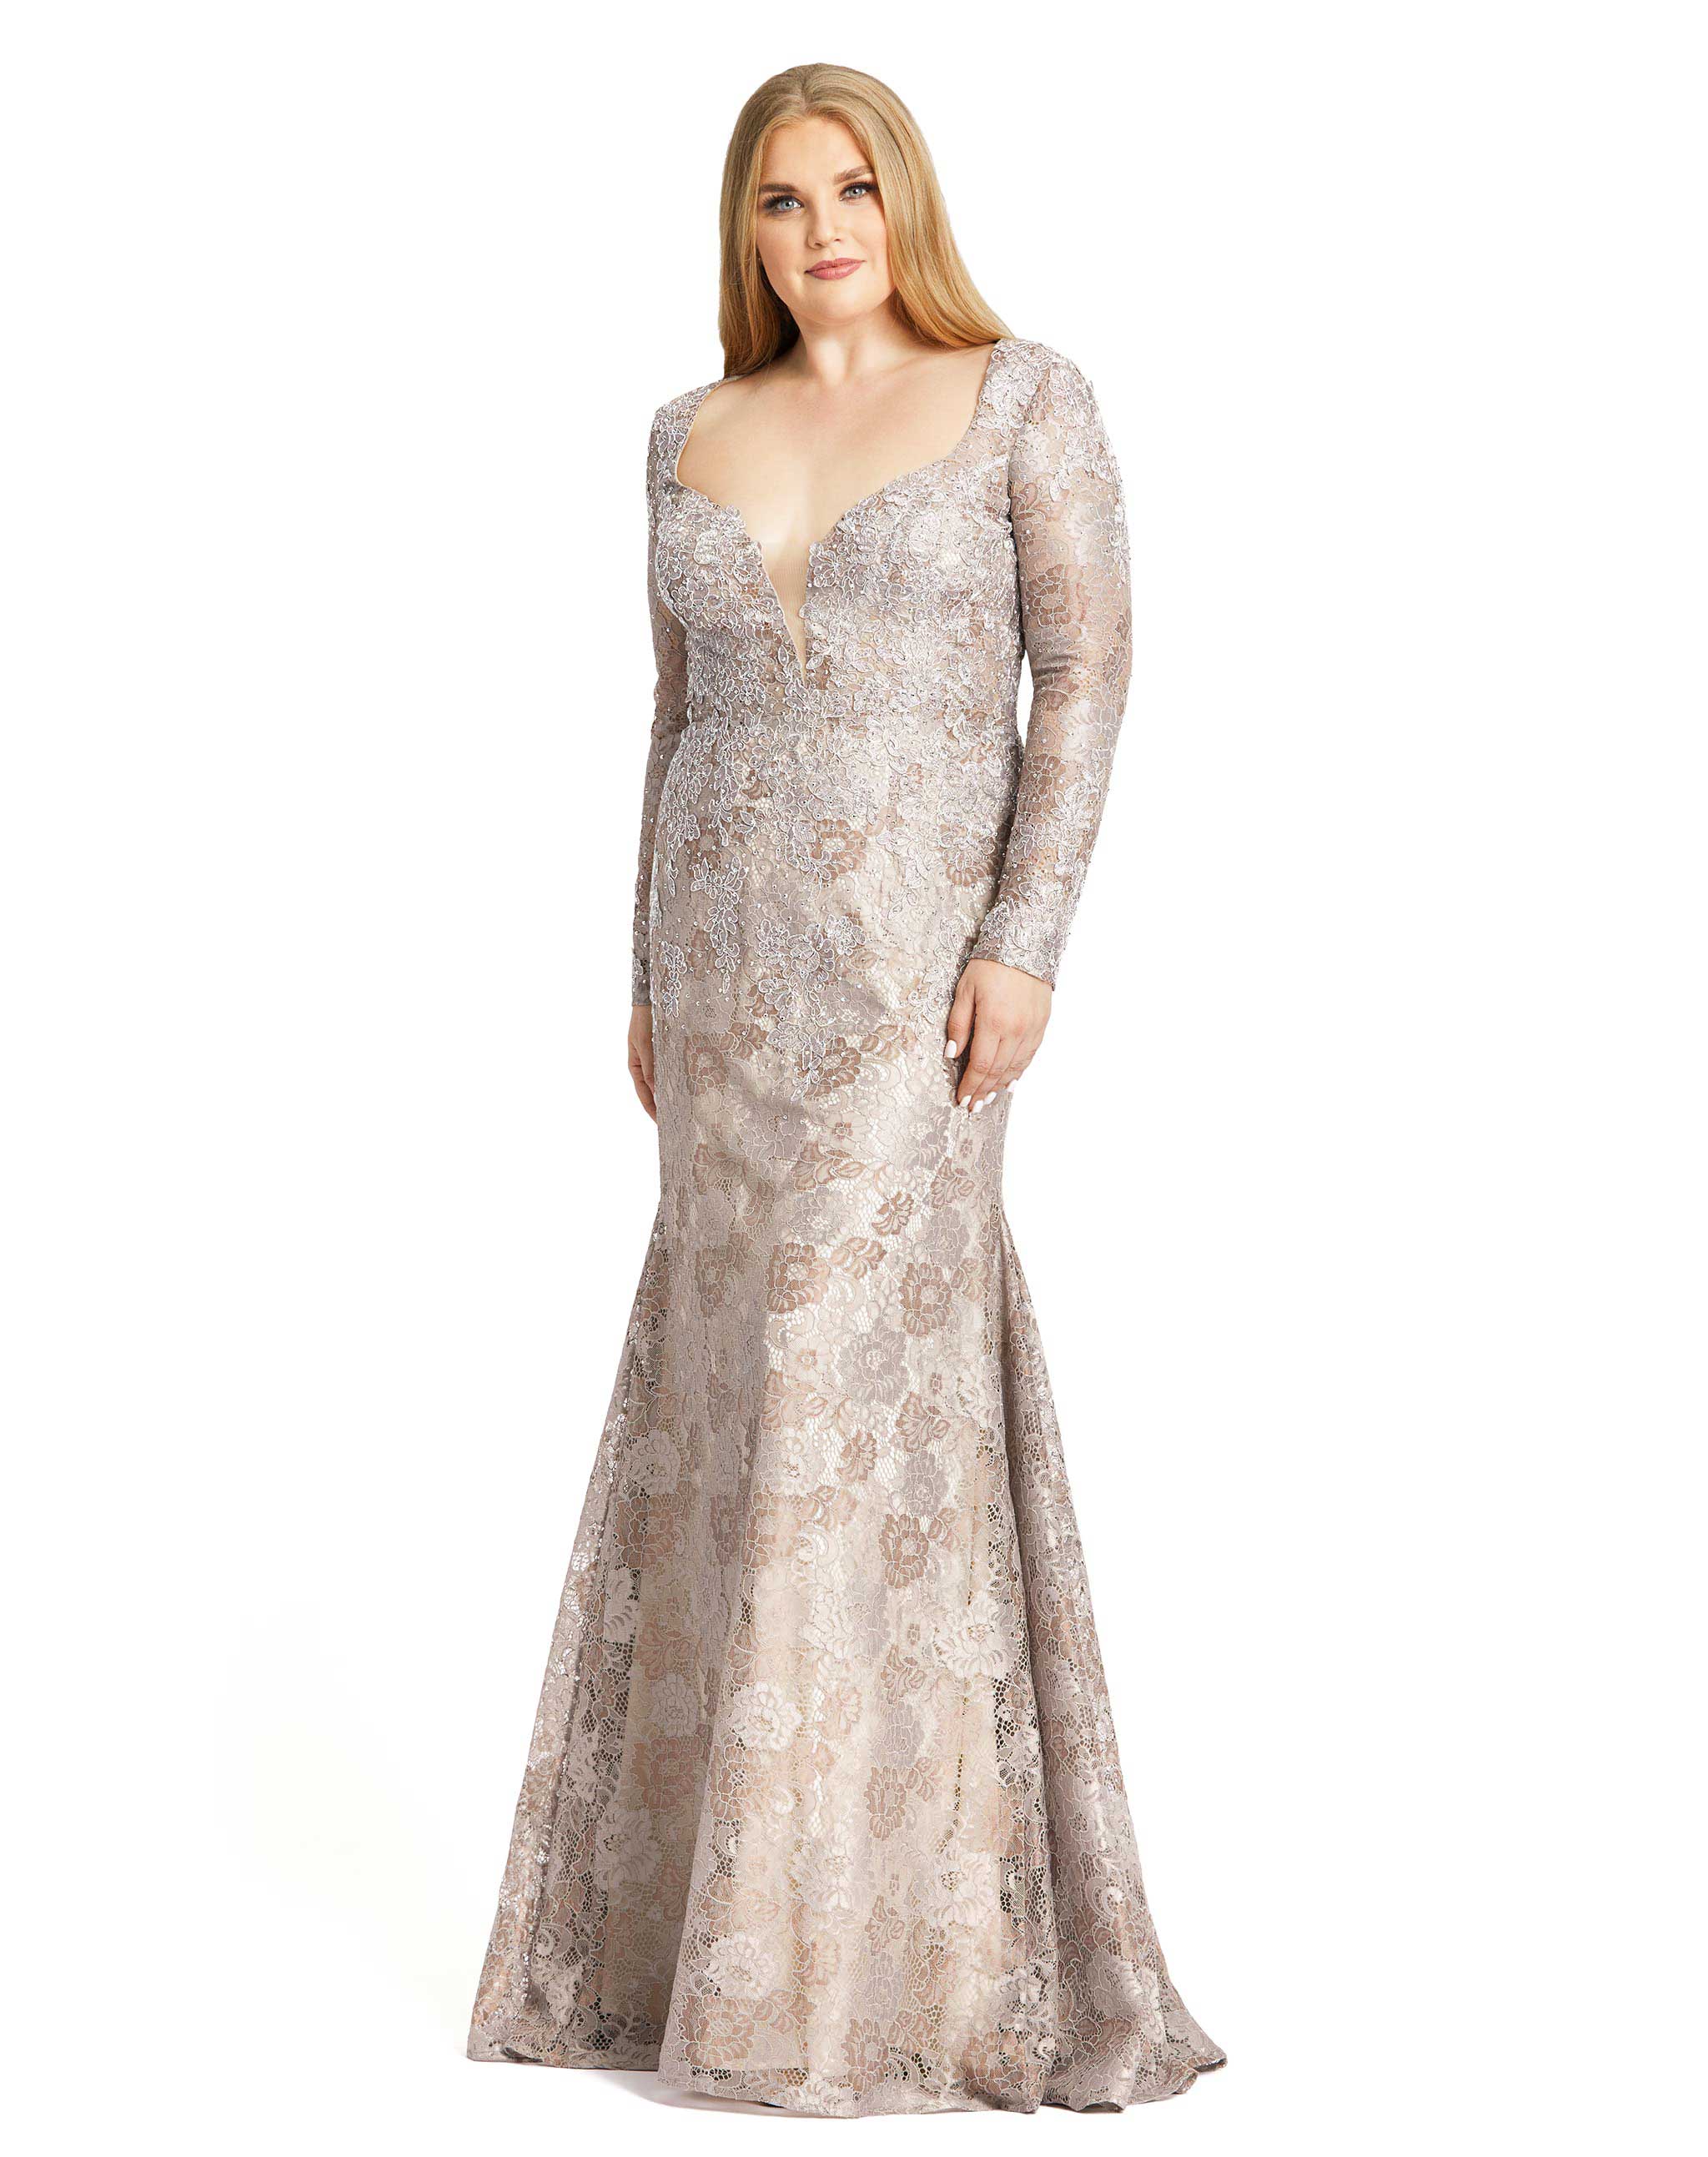 Plunge Neck Embellished Lace Gown (Plus)